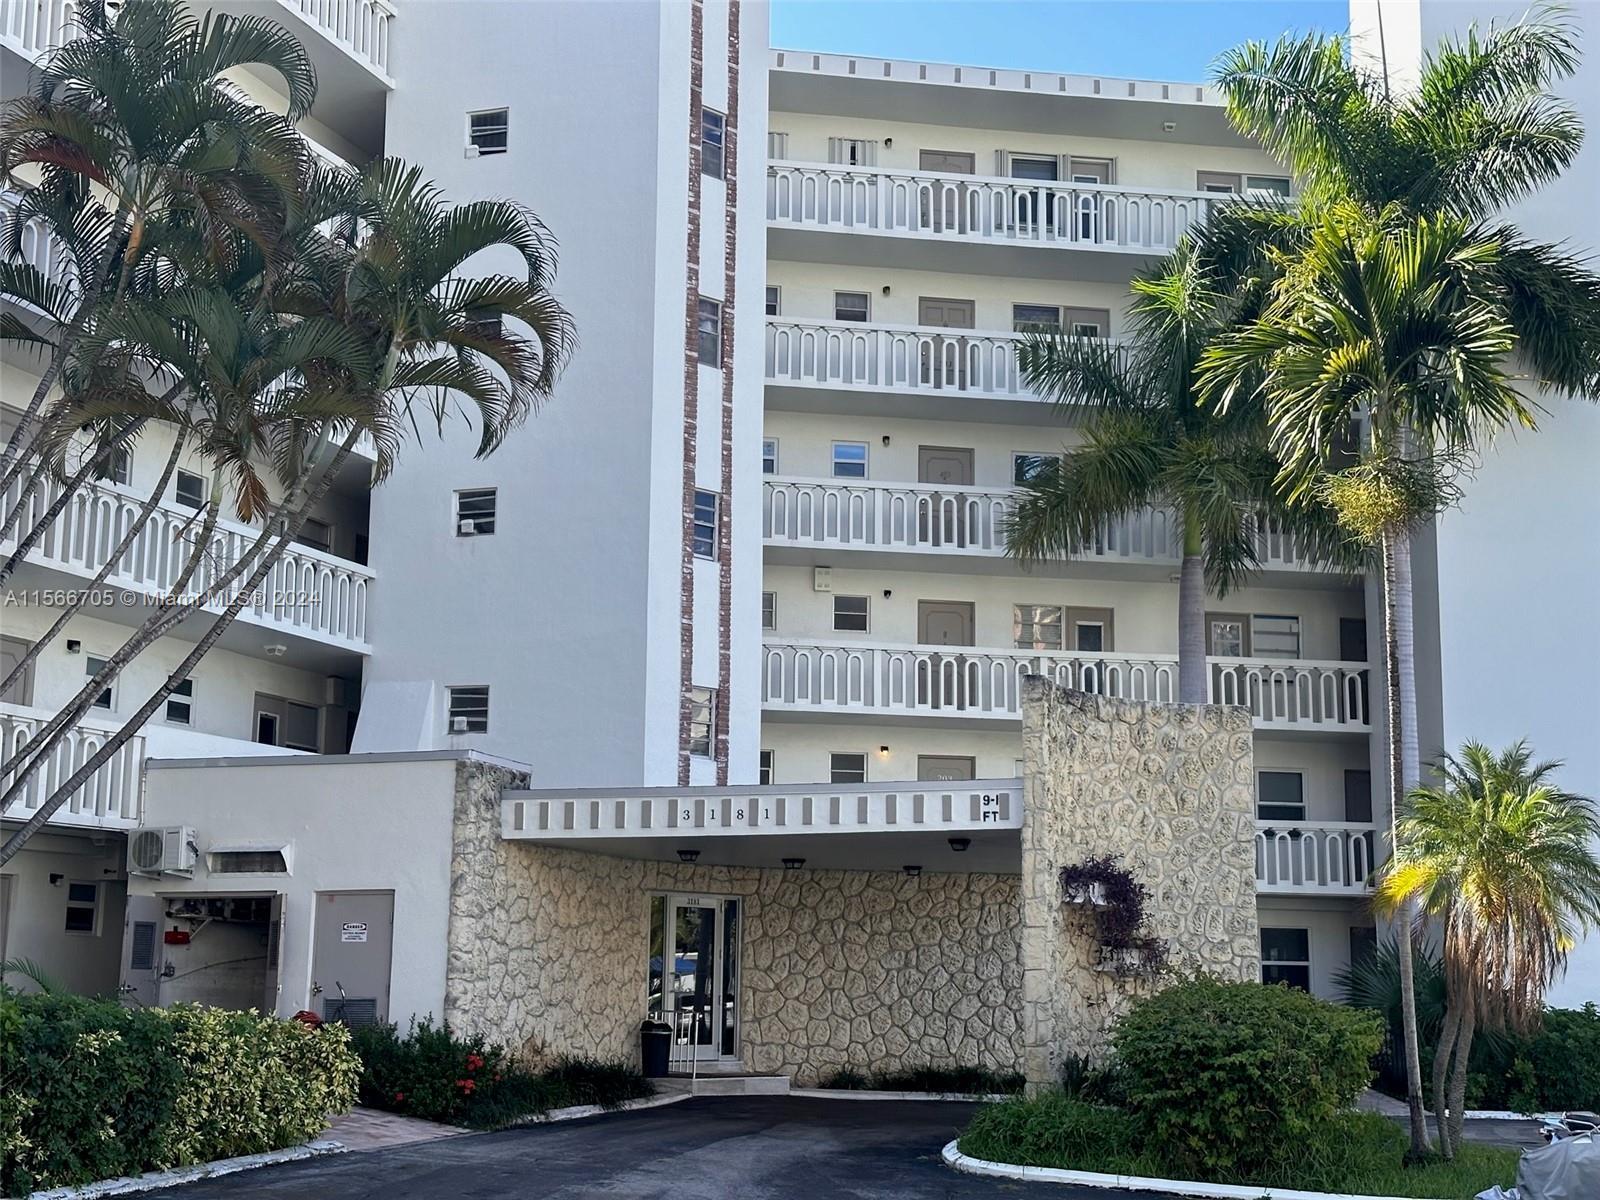 Great Location!!!! This 2 bedroom, 2 bath is within walking distance to the beach, right across the 